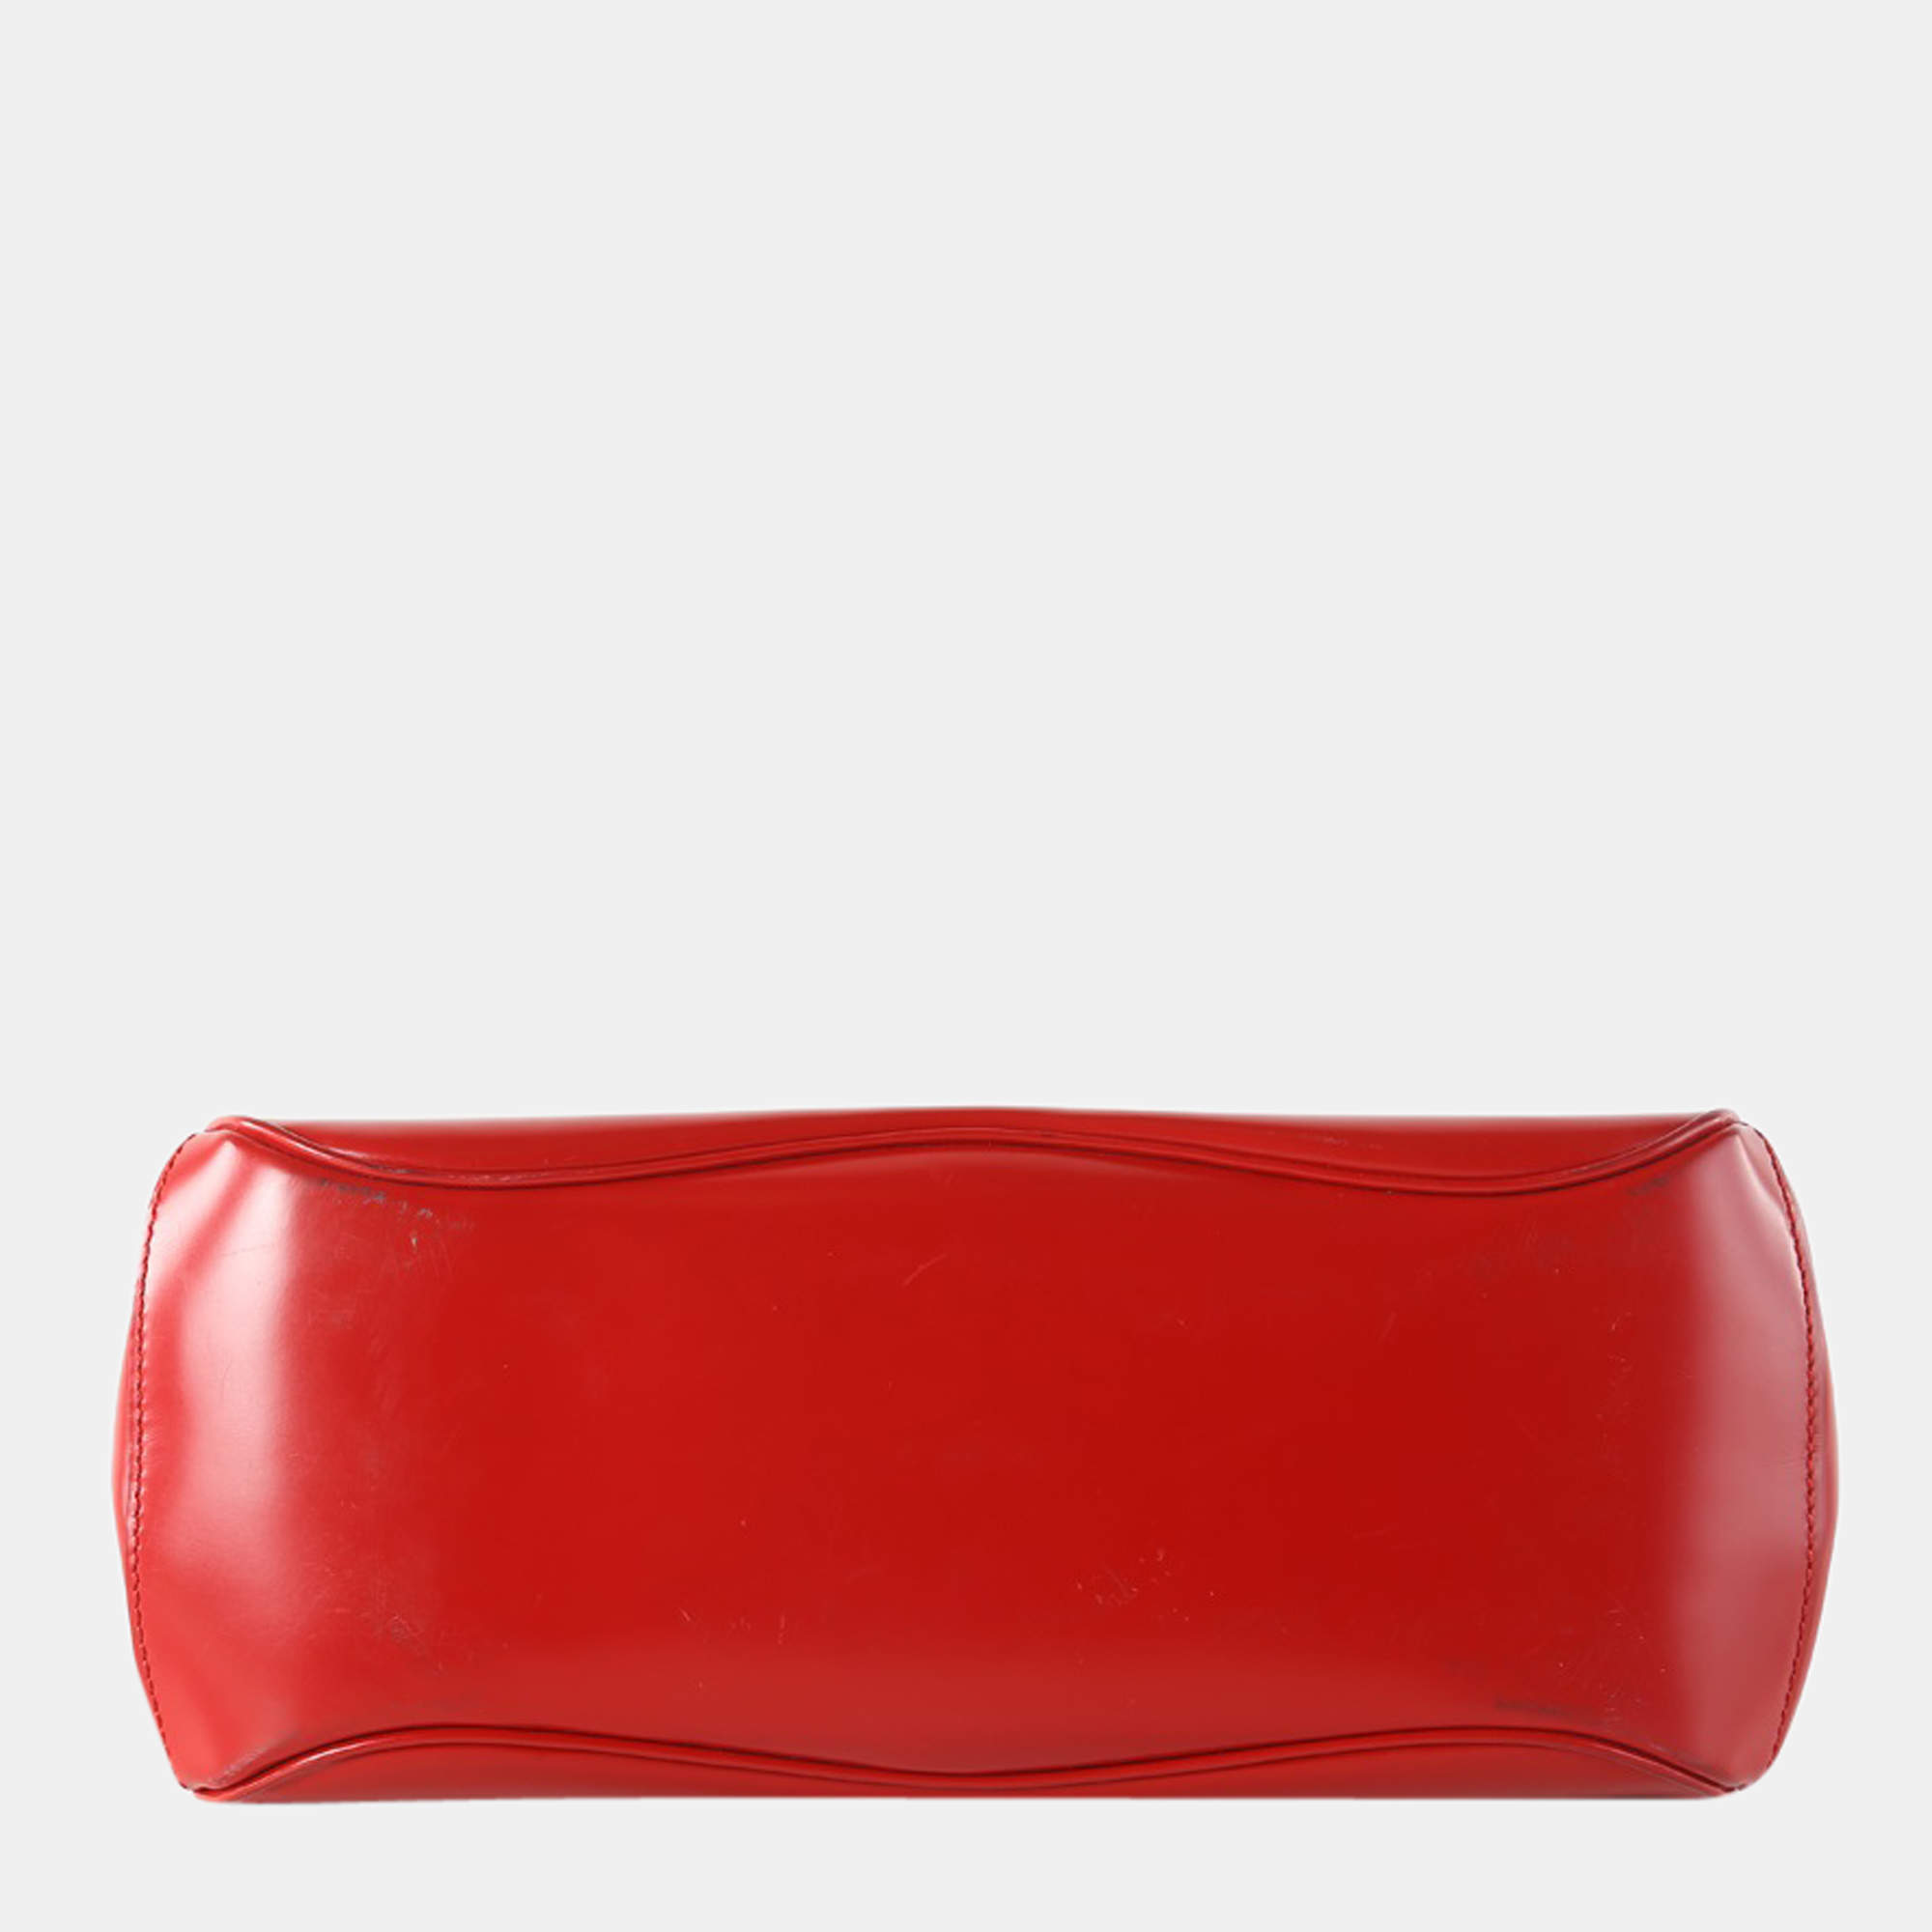 GUCCI HORSEBIT 1955 SHOULDER BAG IN RED LEATHER - Still in fashion